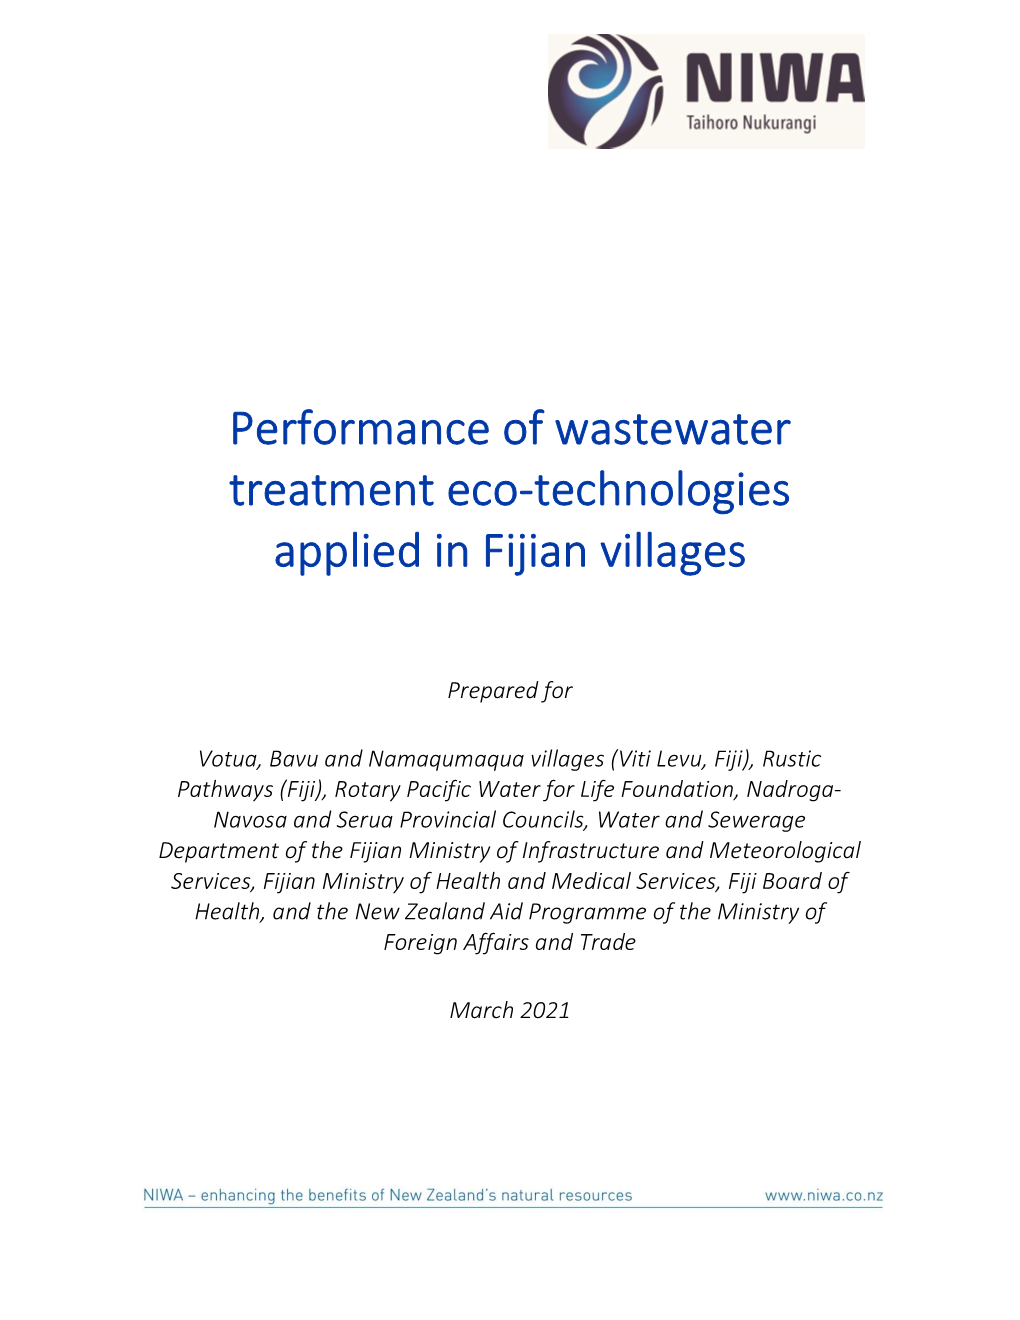 Performance of Wastewater Treatment Eco-Technologies Applied in Fijian Villages